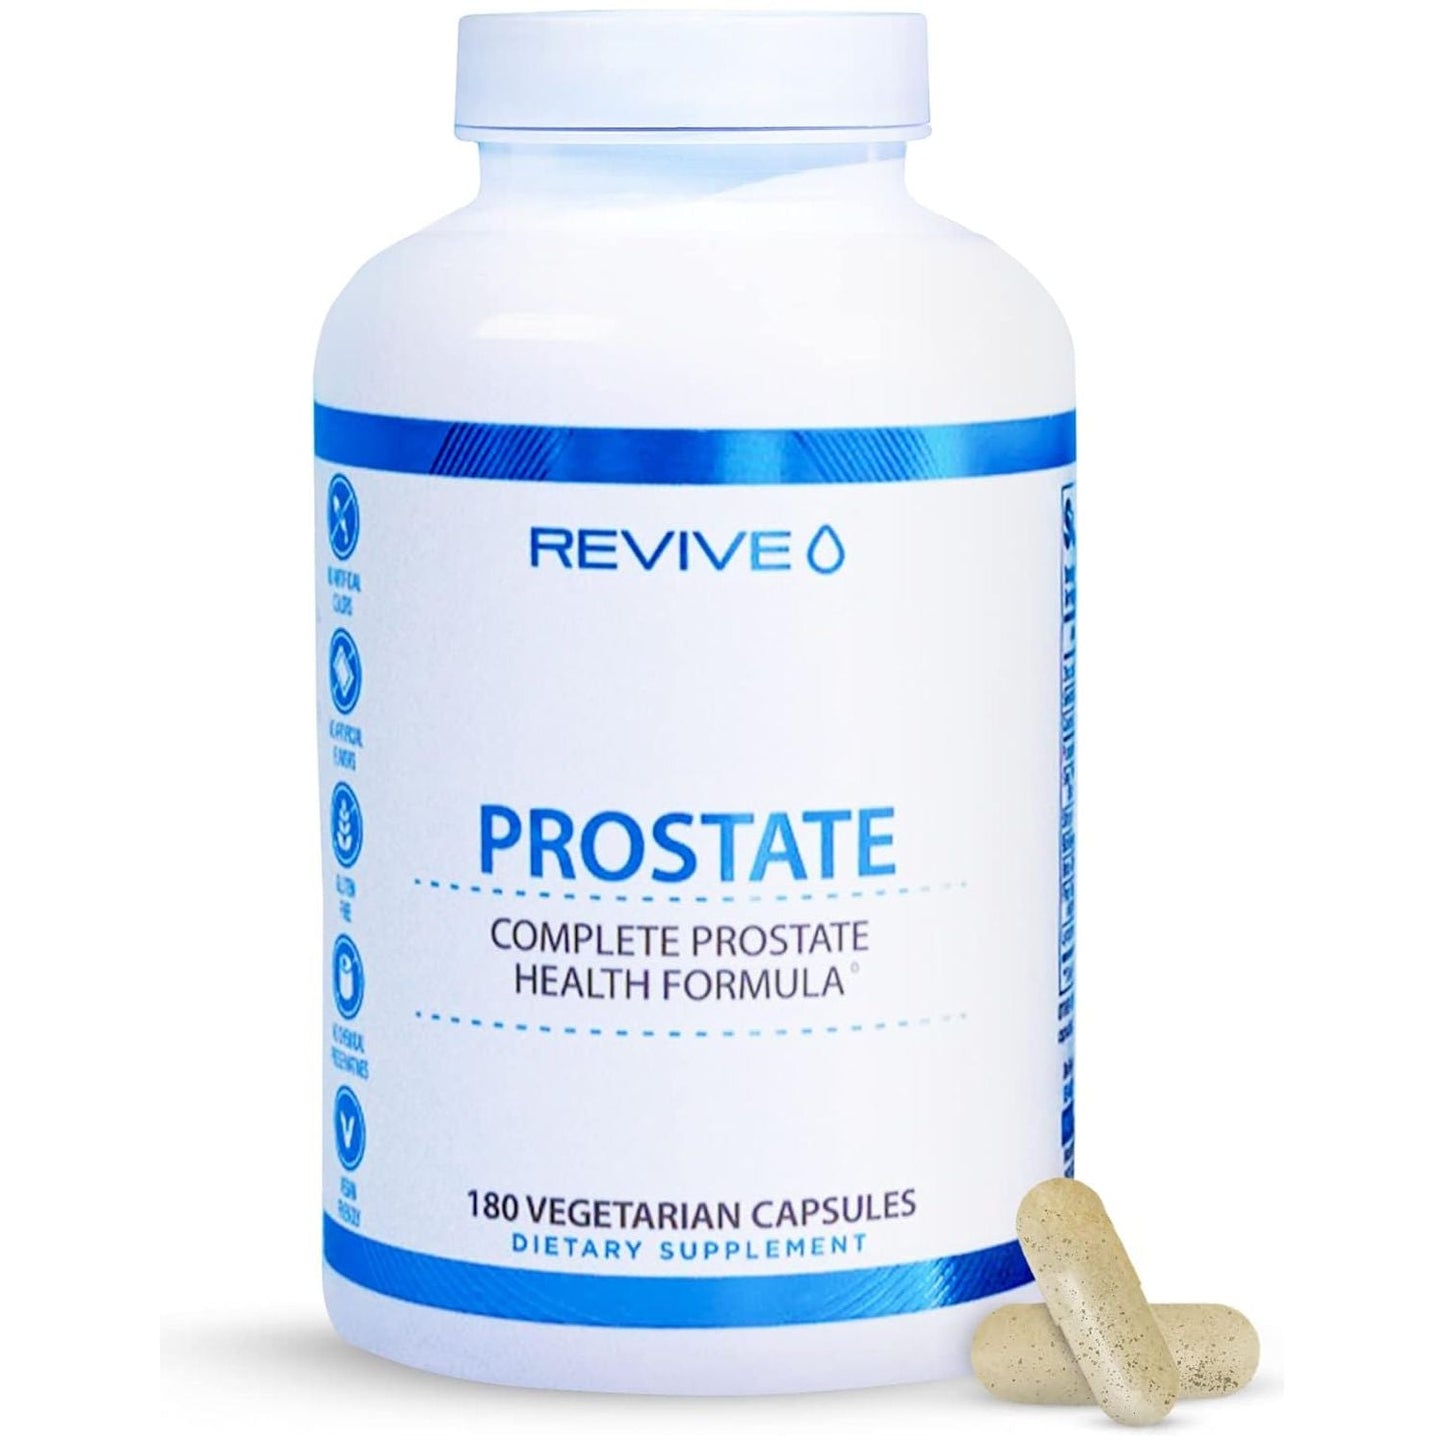 Prostate | Buy 1 Get 1 50% Off Max Muscle Orlando